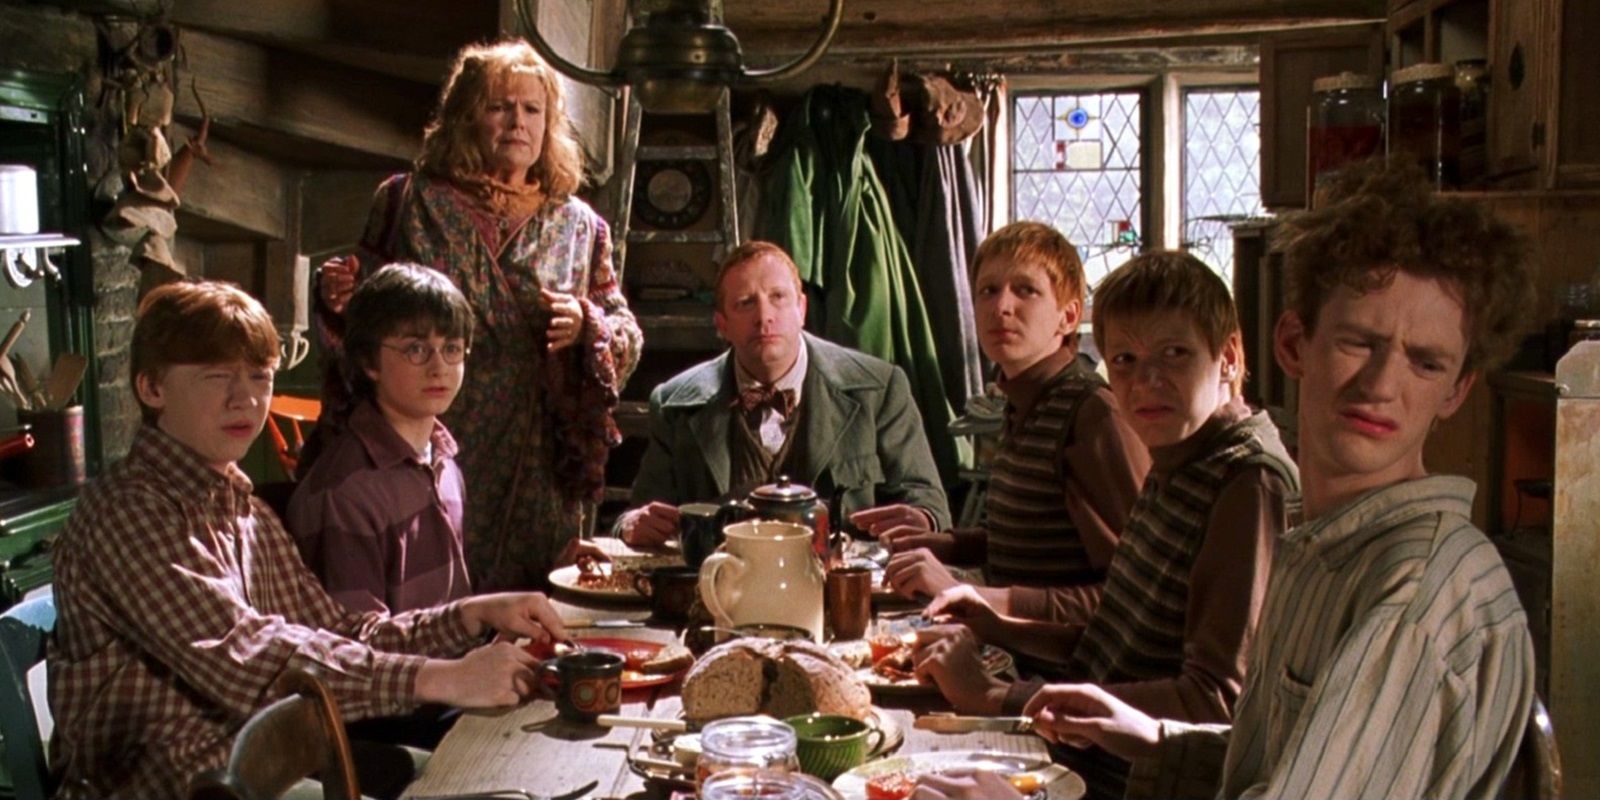 Weasley family breakfast, Harry Pottet, ron, percy, george and fred, molly and arthur weasley, chamber of secrets